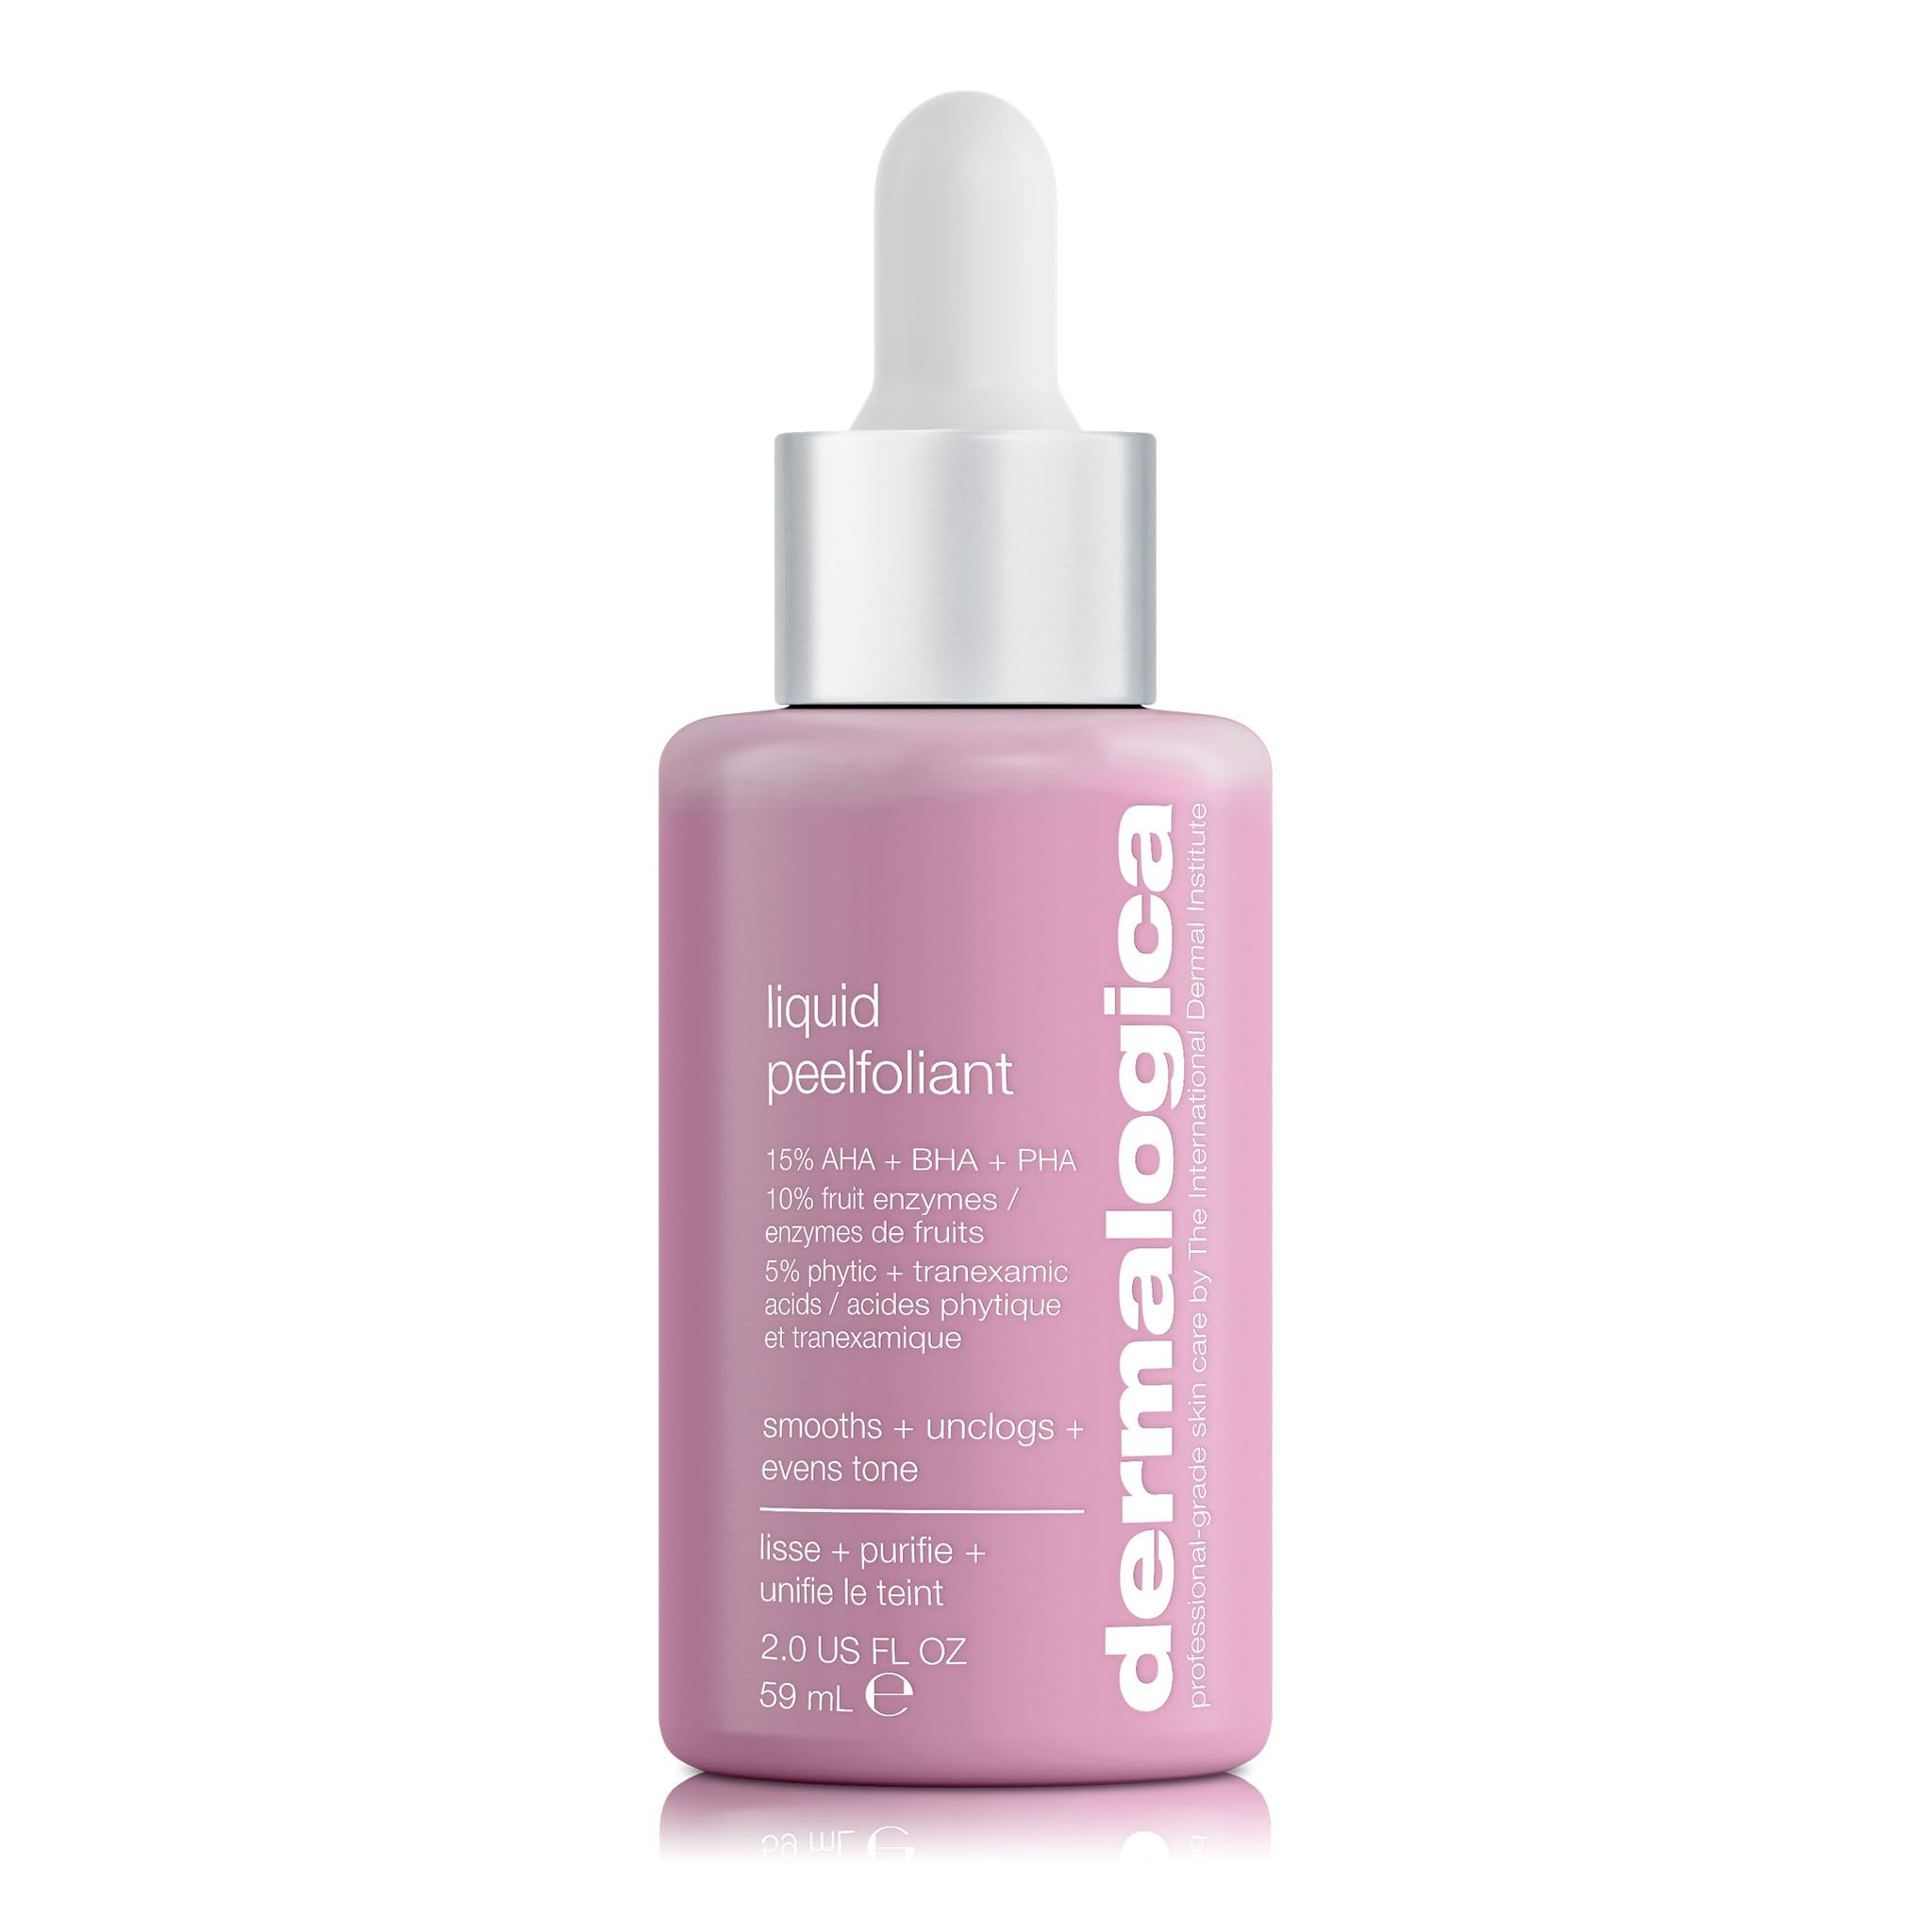 Dermalogica Liquid Peelfoliant with Glycolic Acid, Face Exfoliator Peel with AHA BHA PHA, Smooths Fine Lines and Wrinkles, Unclogs Pores, and Improve Skin Tone - 2 fl oz